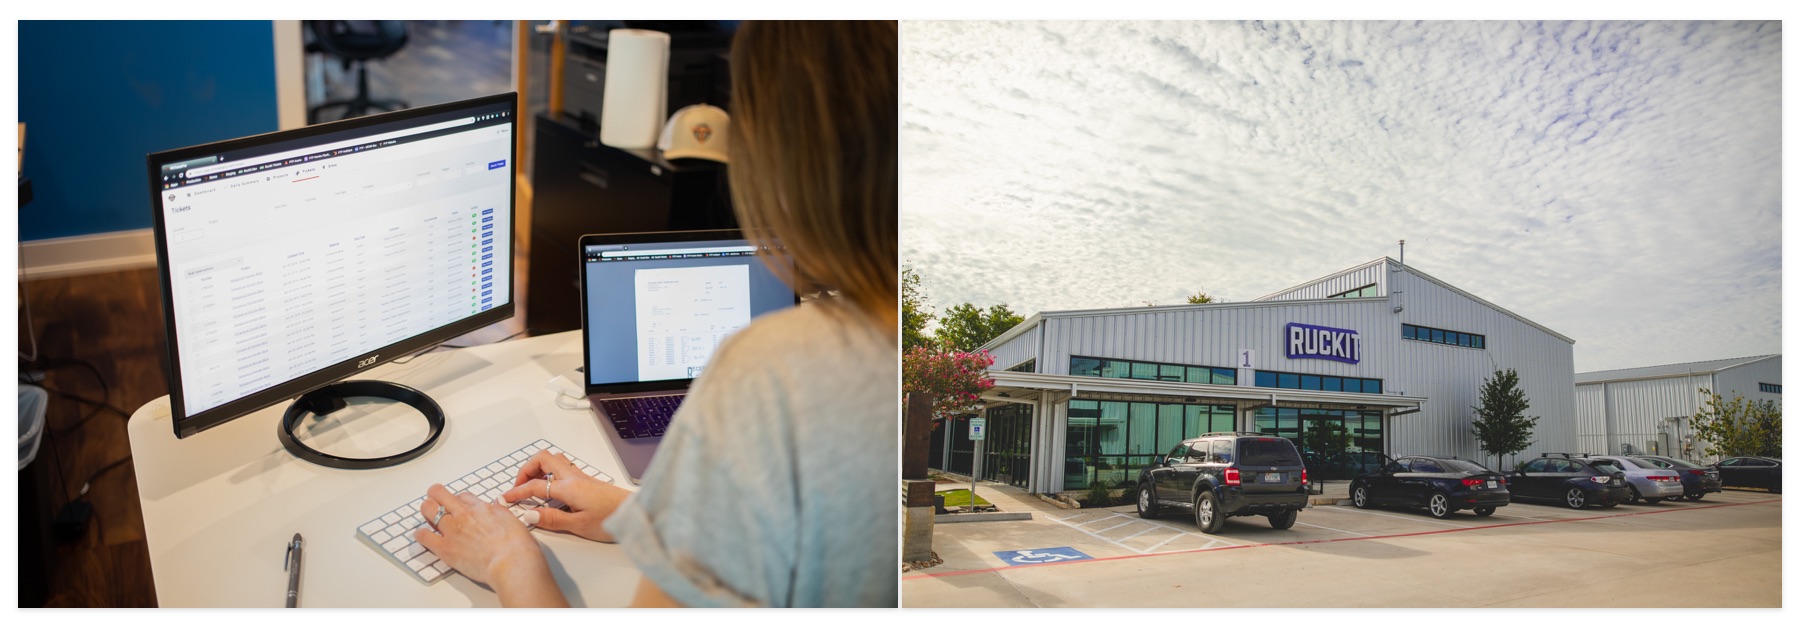 A woman using the Ruckit dashboard, and an outside shot of the Ruckit headquarters